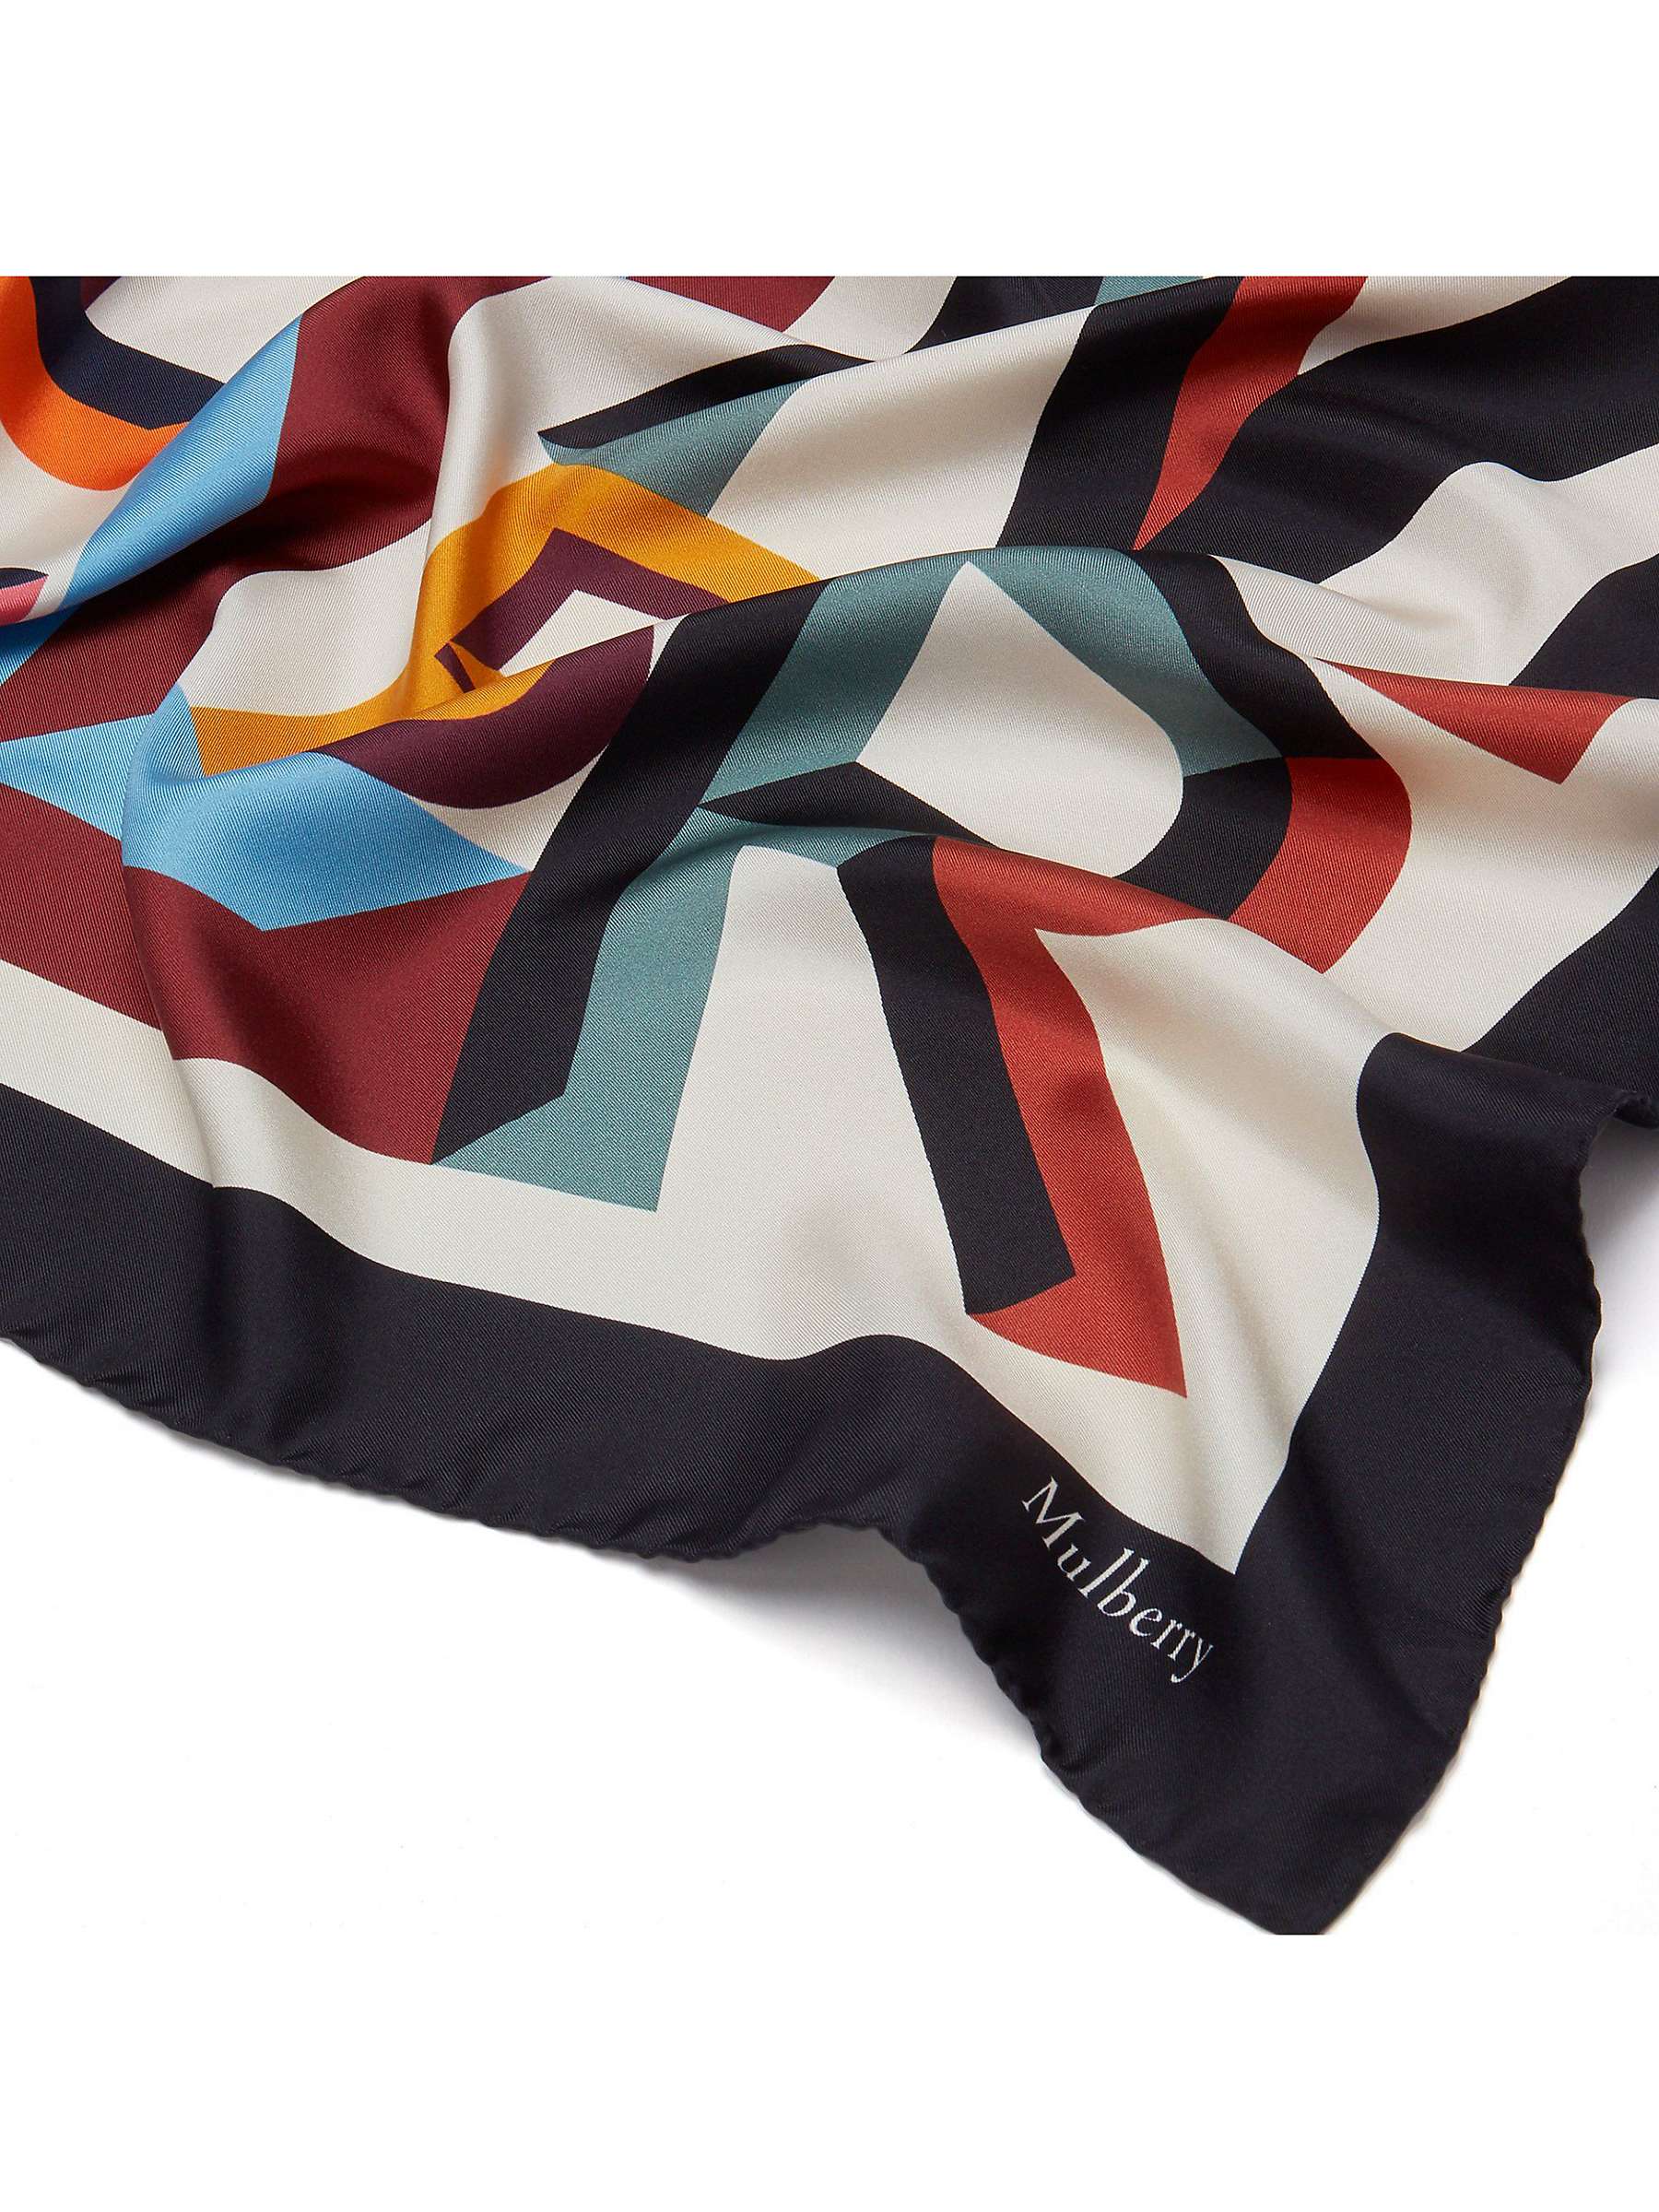 Buy Mulberry Alphabet Silk Twill Square Scarf Online at johnlewis.com